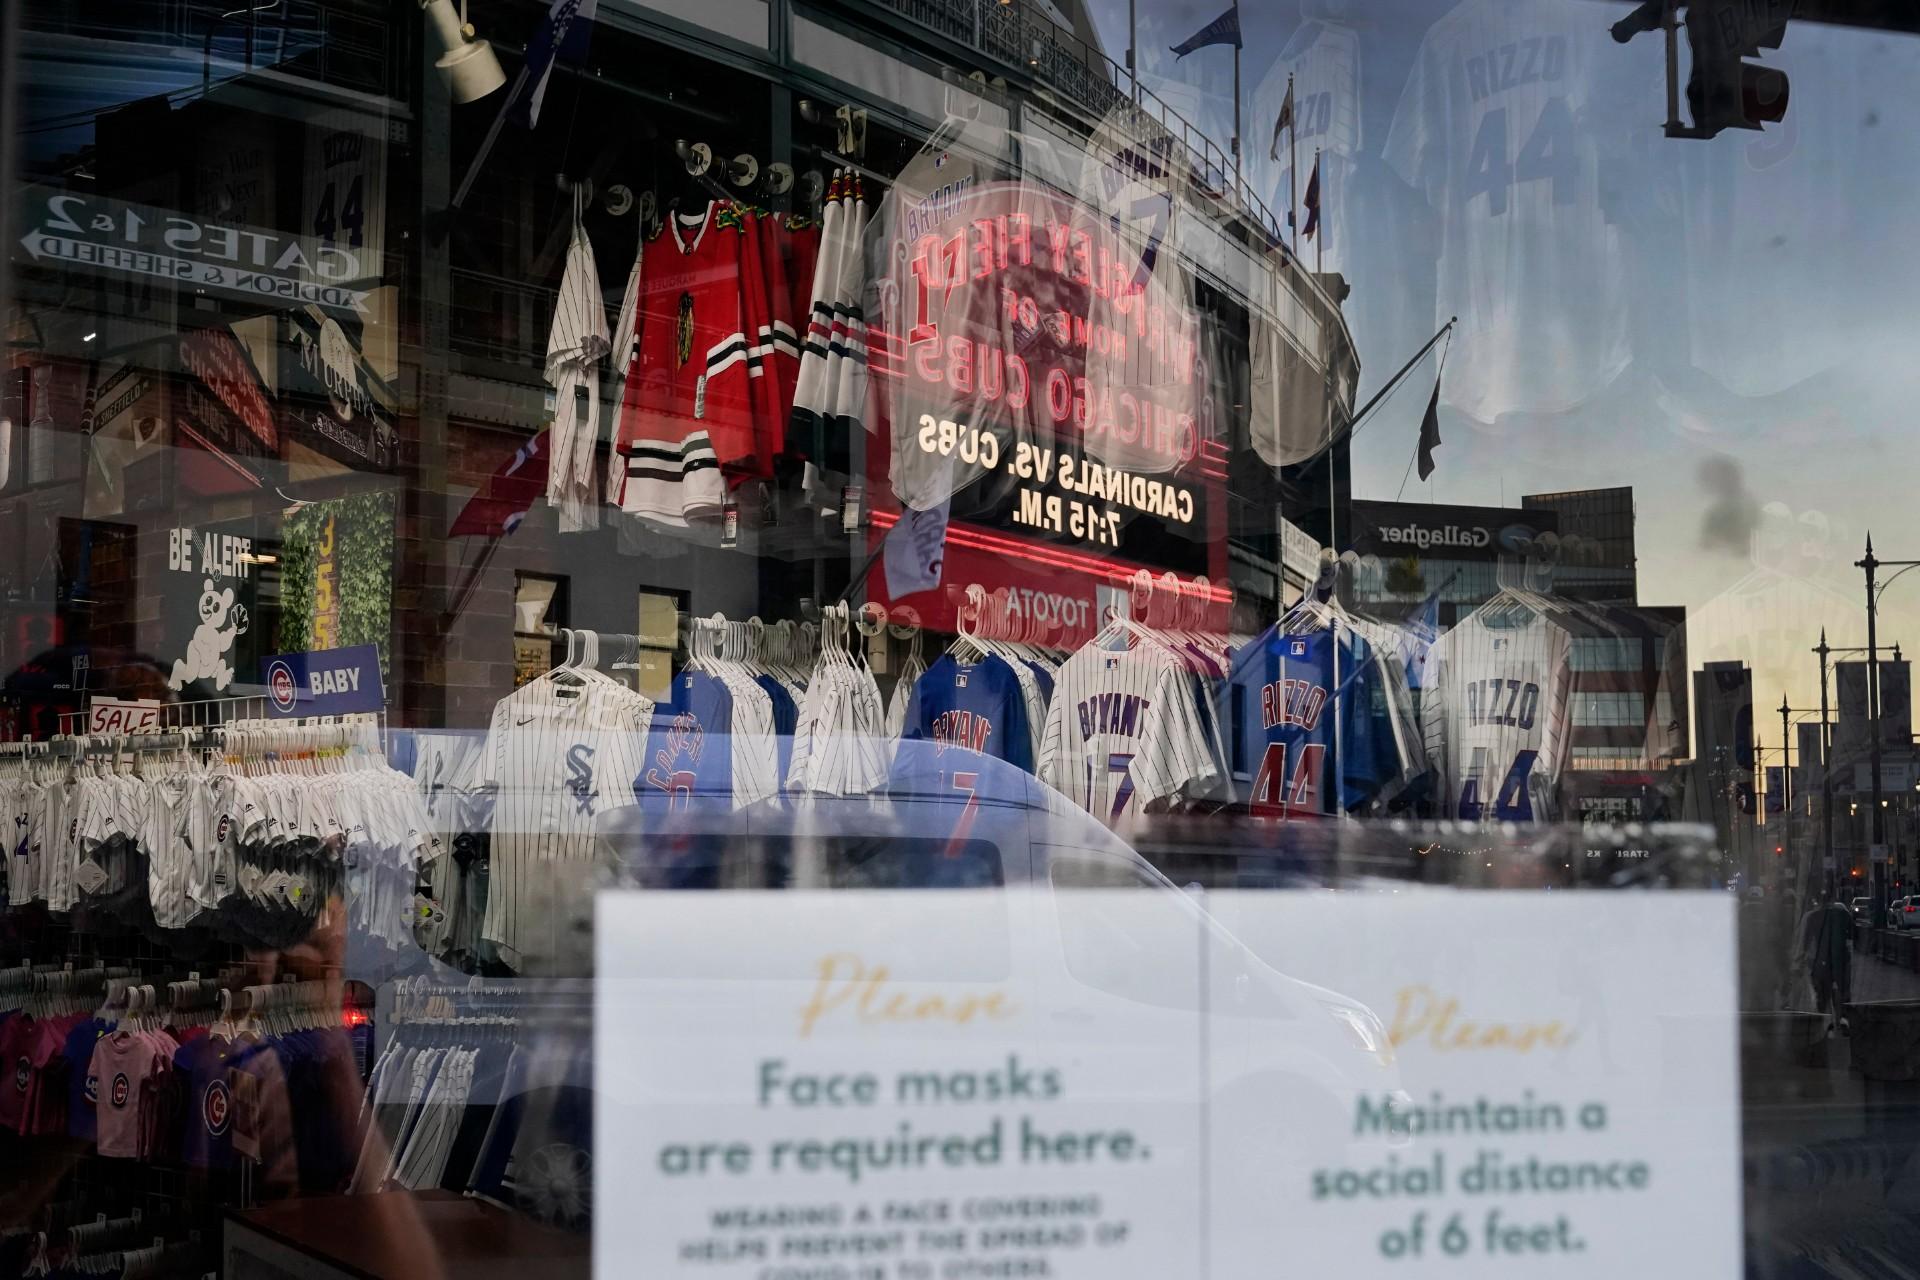 The Wrigley Field marquee is reflected Friday, Sept. 4, 2020, in the window of the Sports World apparel store in the Wrigleyville neighborhood of Chicago. (AP Photo / Charles Rex Arbogast)